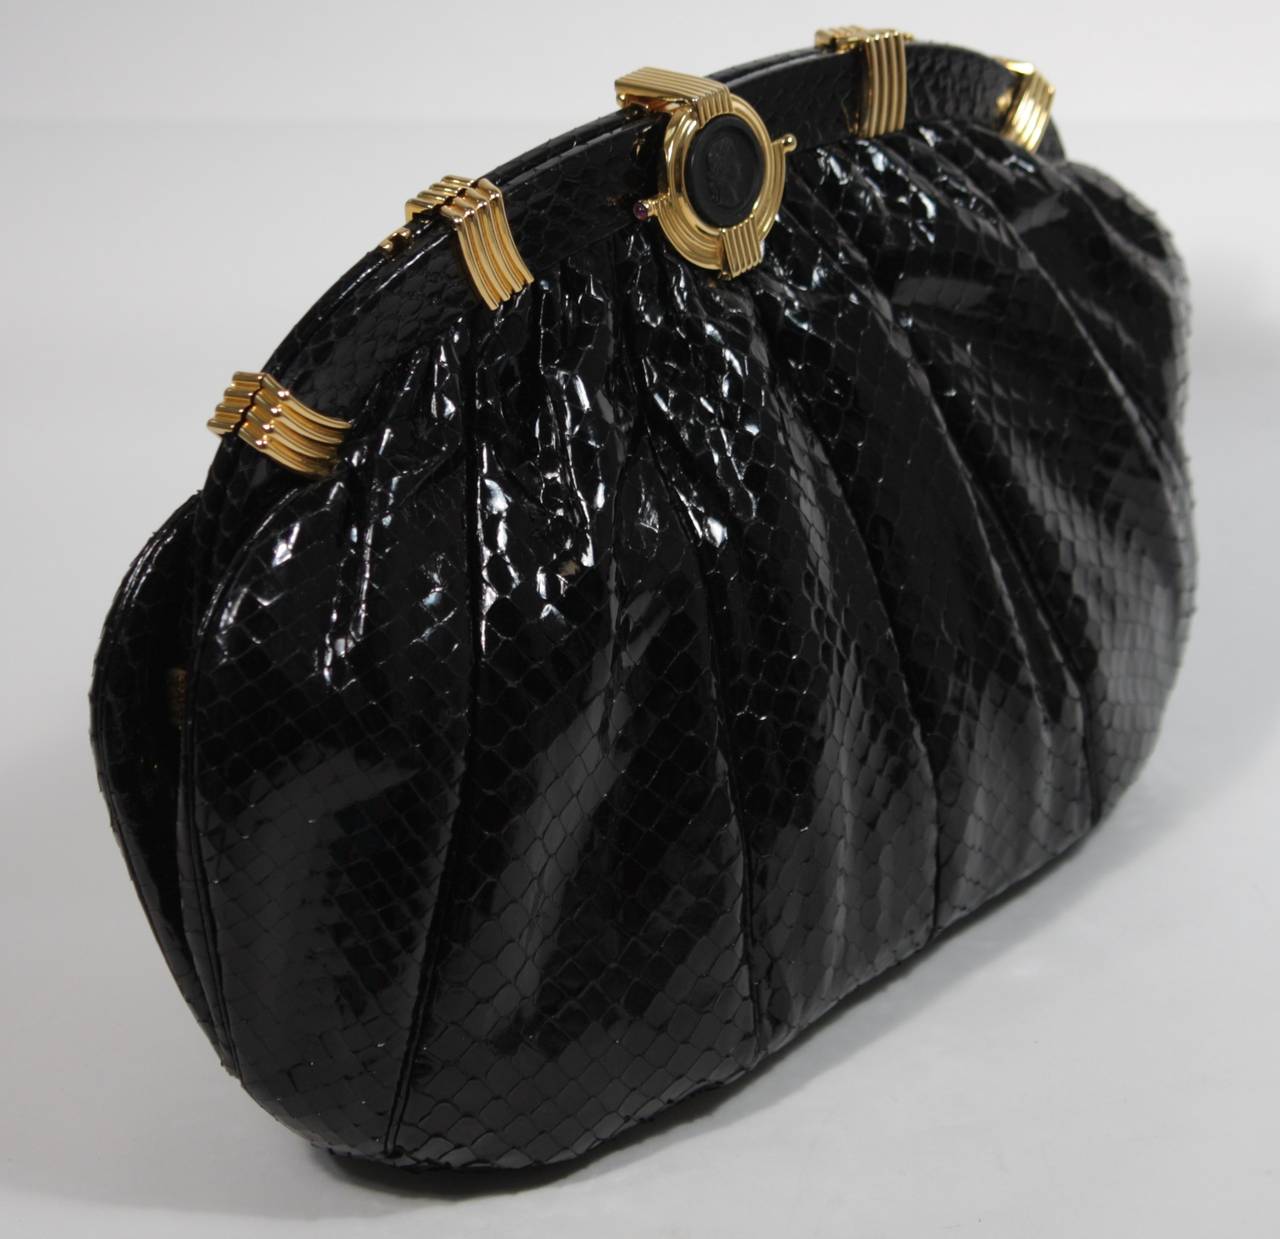 Judith Leiber Black Snakeskin Purse with Cameo Closure and Gold Hardware 1